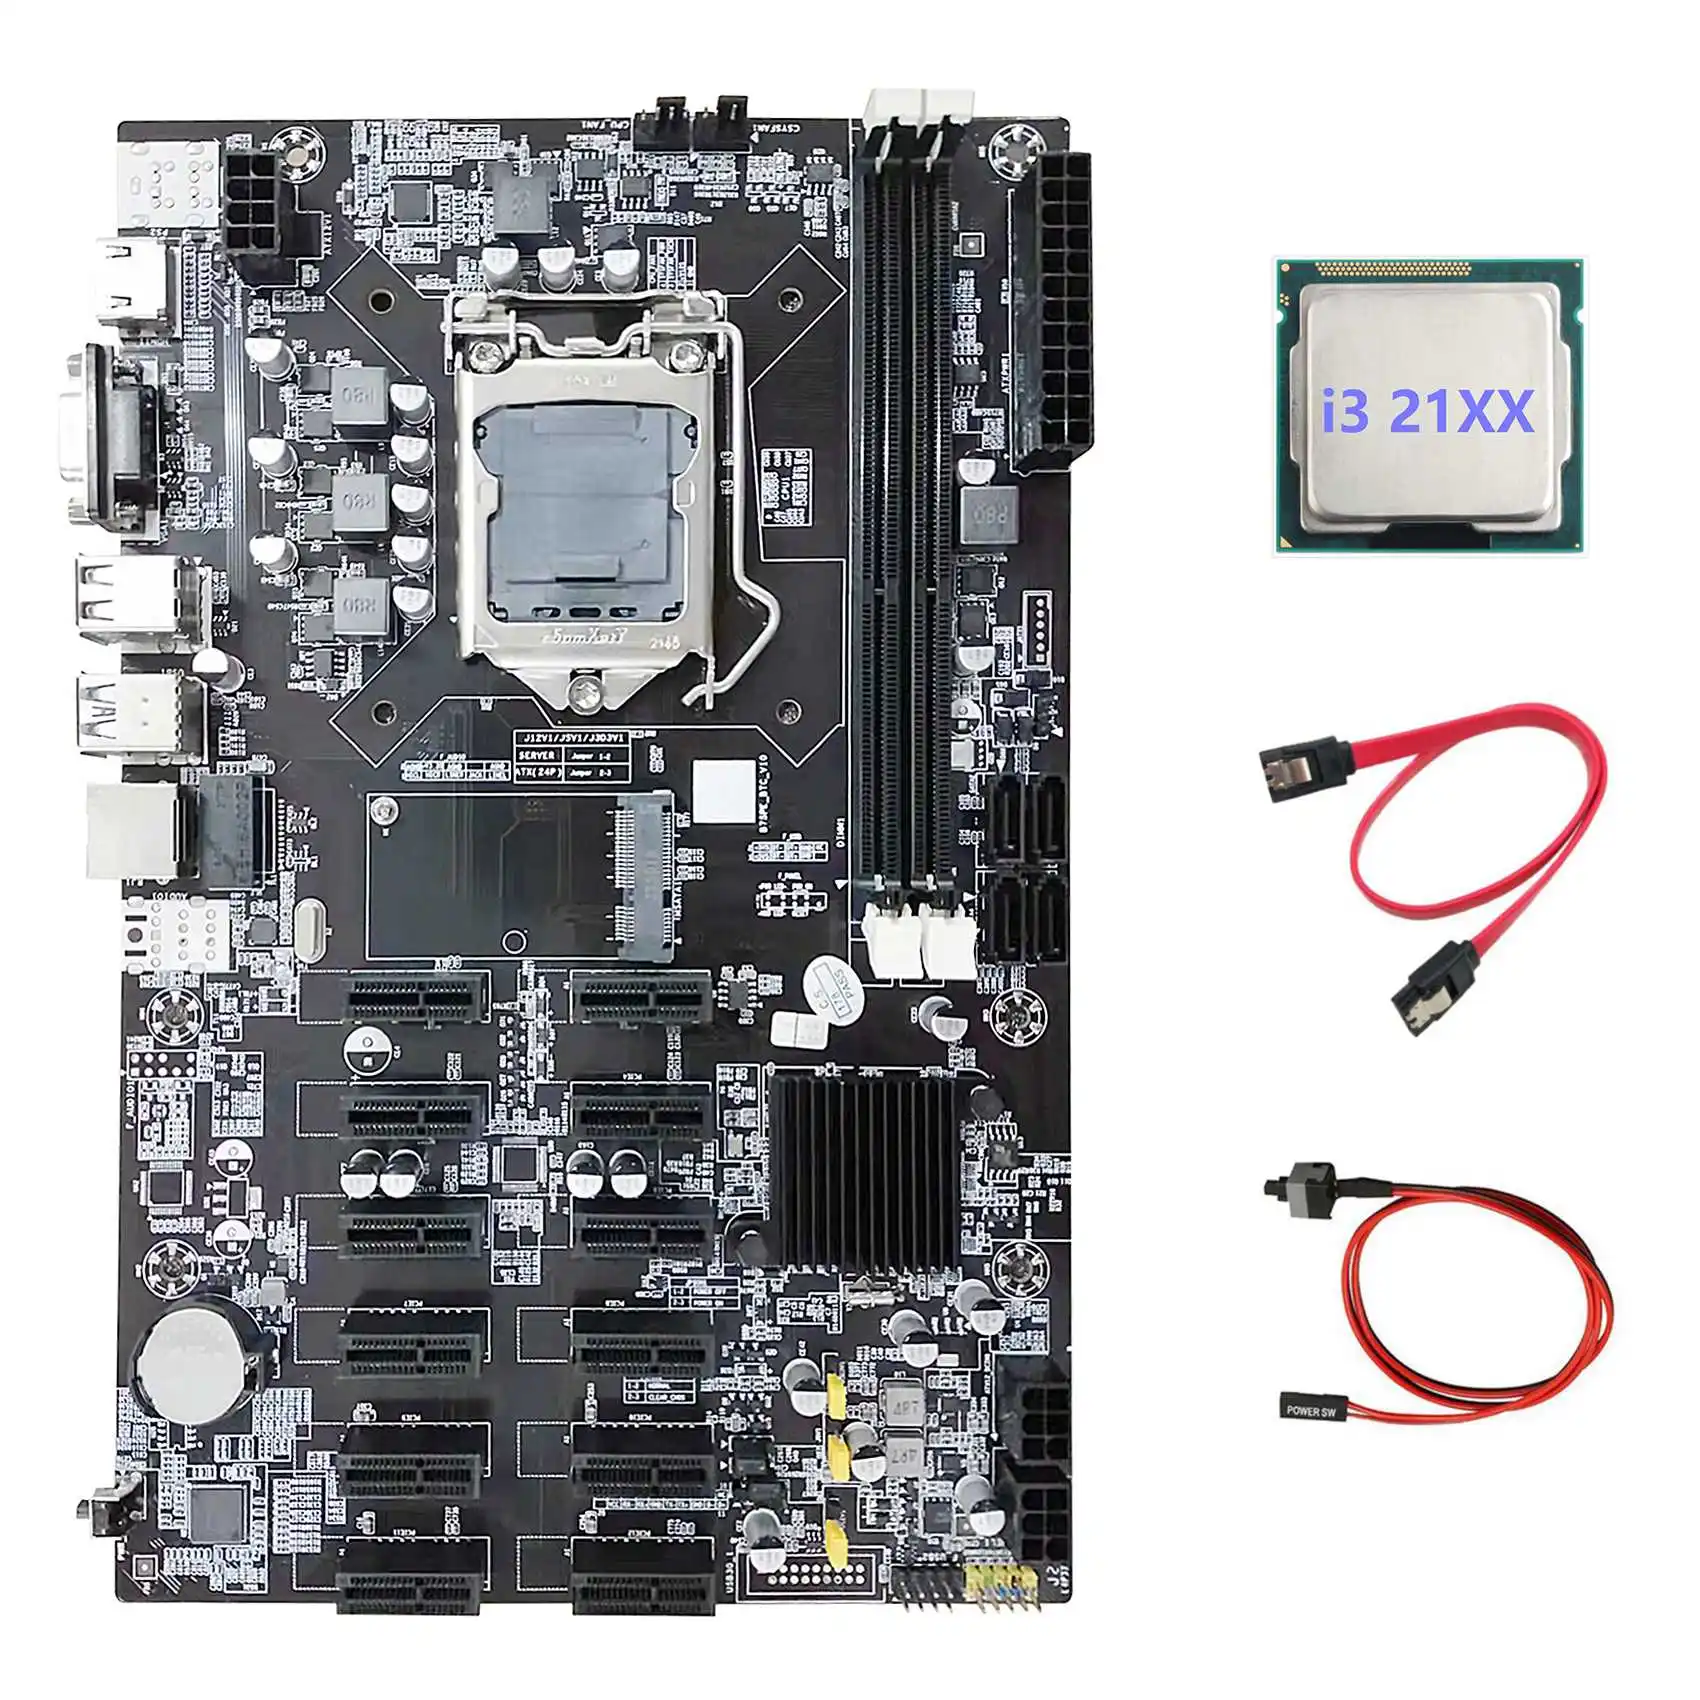 

B75 ETH Mining Motherboard 12 PCIE+I3 21XX CPU+SATA Cable+Switch Cable LGA1155 MSATA DDR3 B75 BTC Miner Motherboard